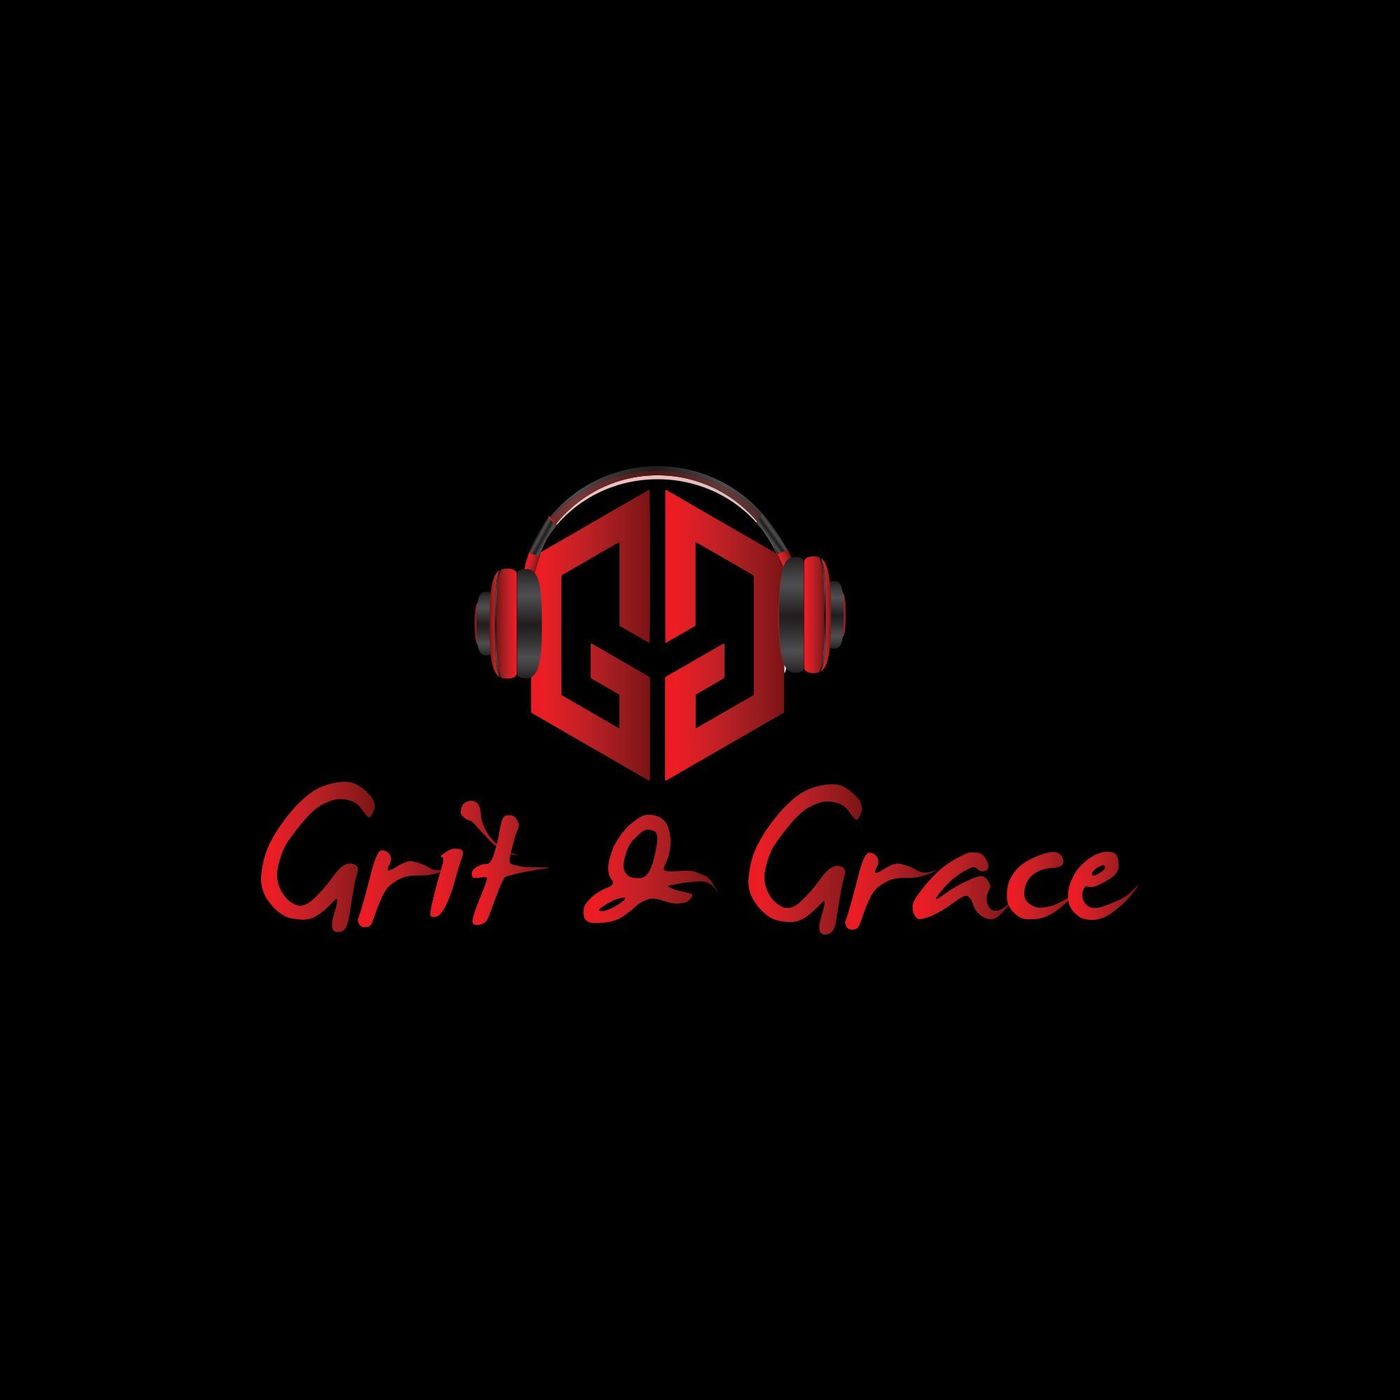 Grit and Grace: Business with Purpose